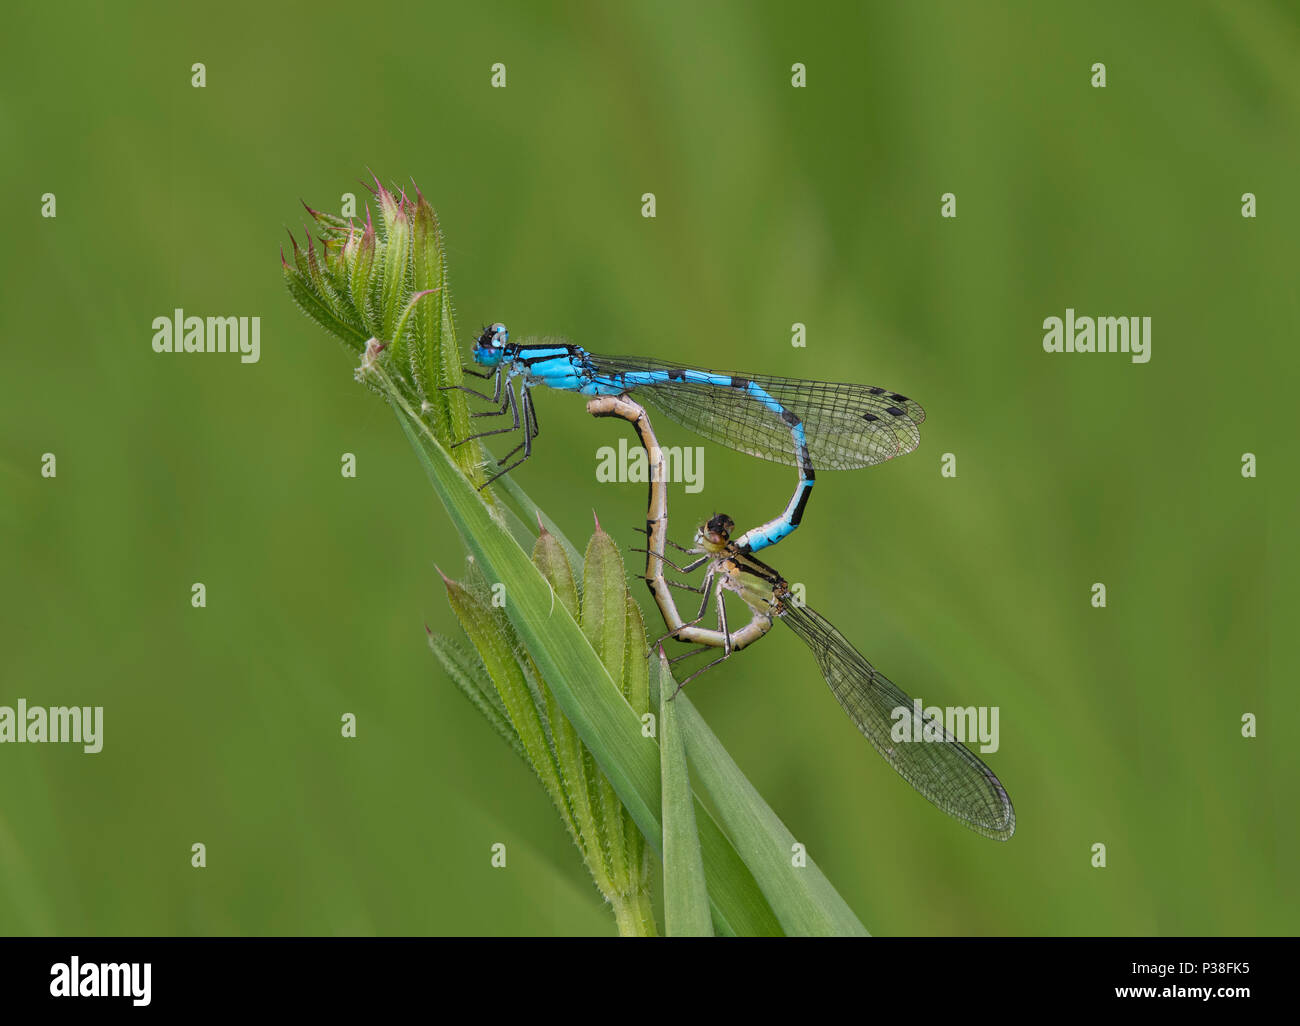 Mating pair of Blue-tailed Damselfly, Ischnura elegans, perched on reed stem in Lancashire, UK Stock Photo